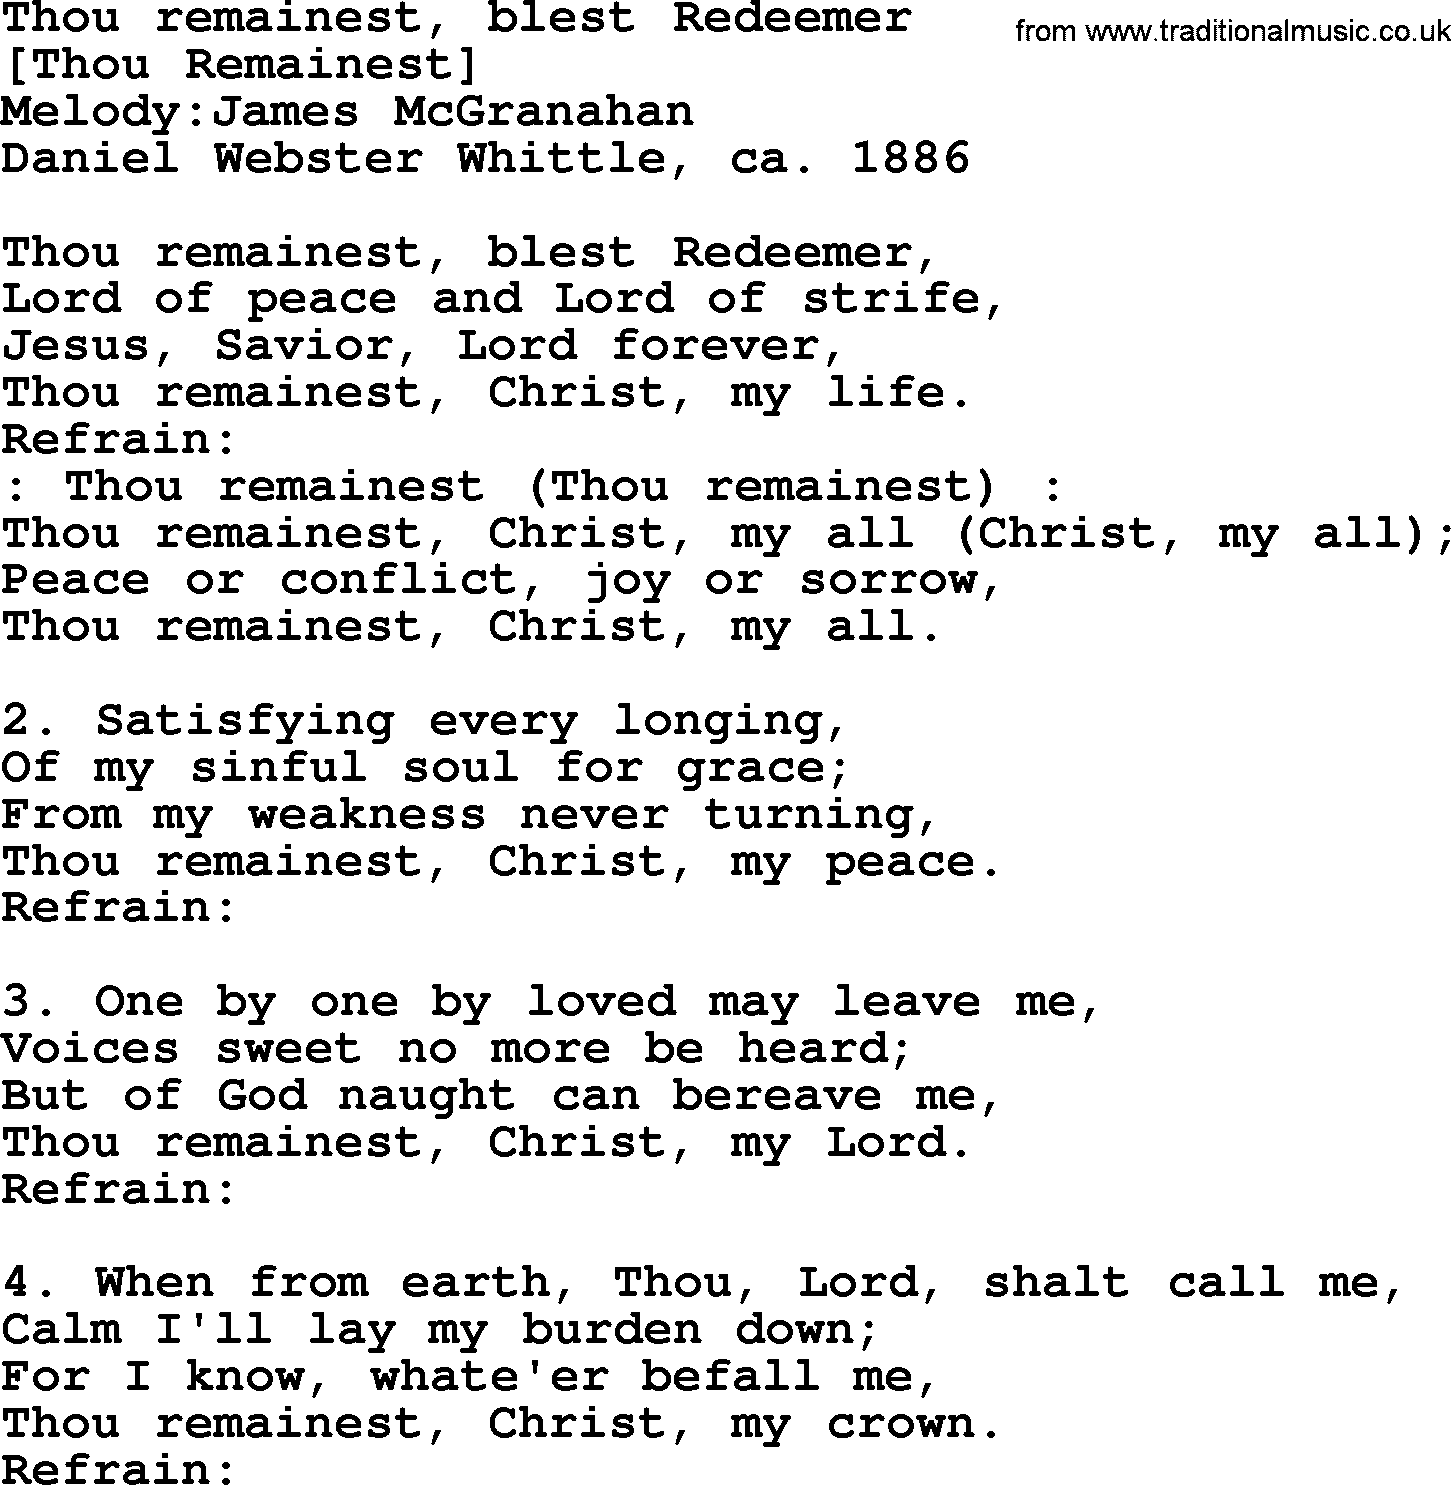 Old American Song: Thou Remainest, Blest Redeemer, lyrics